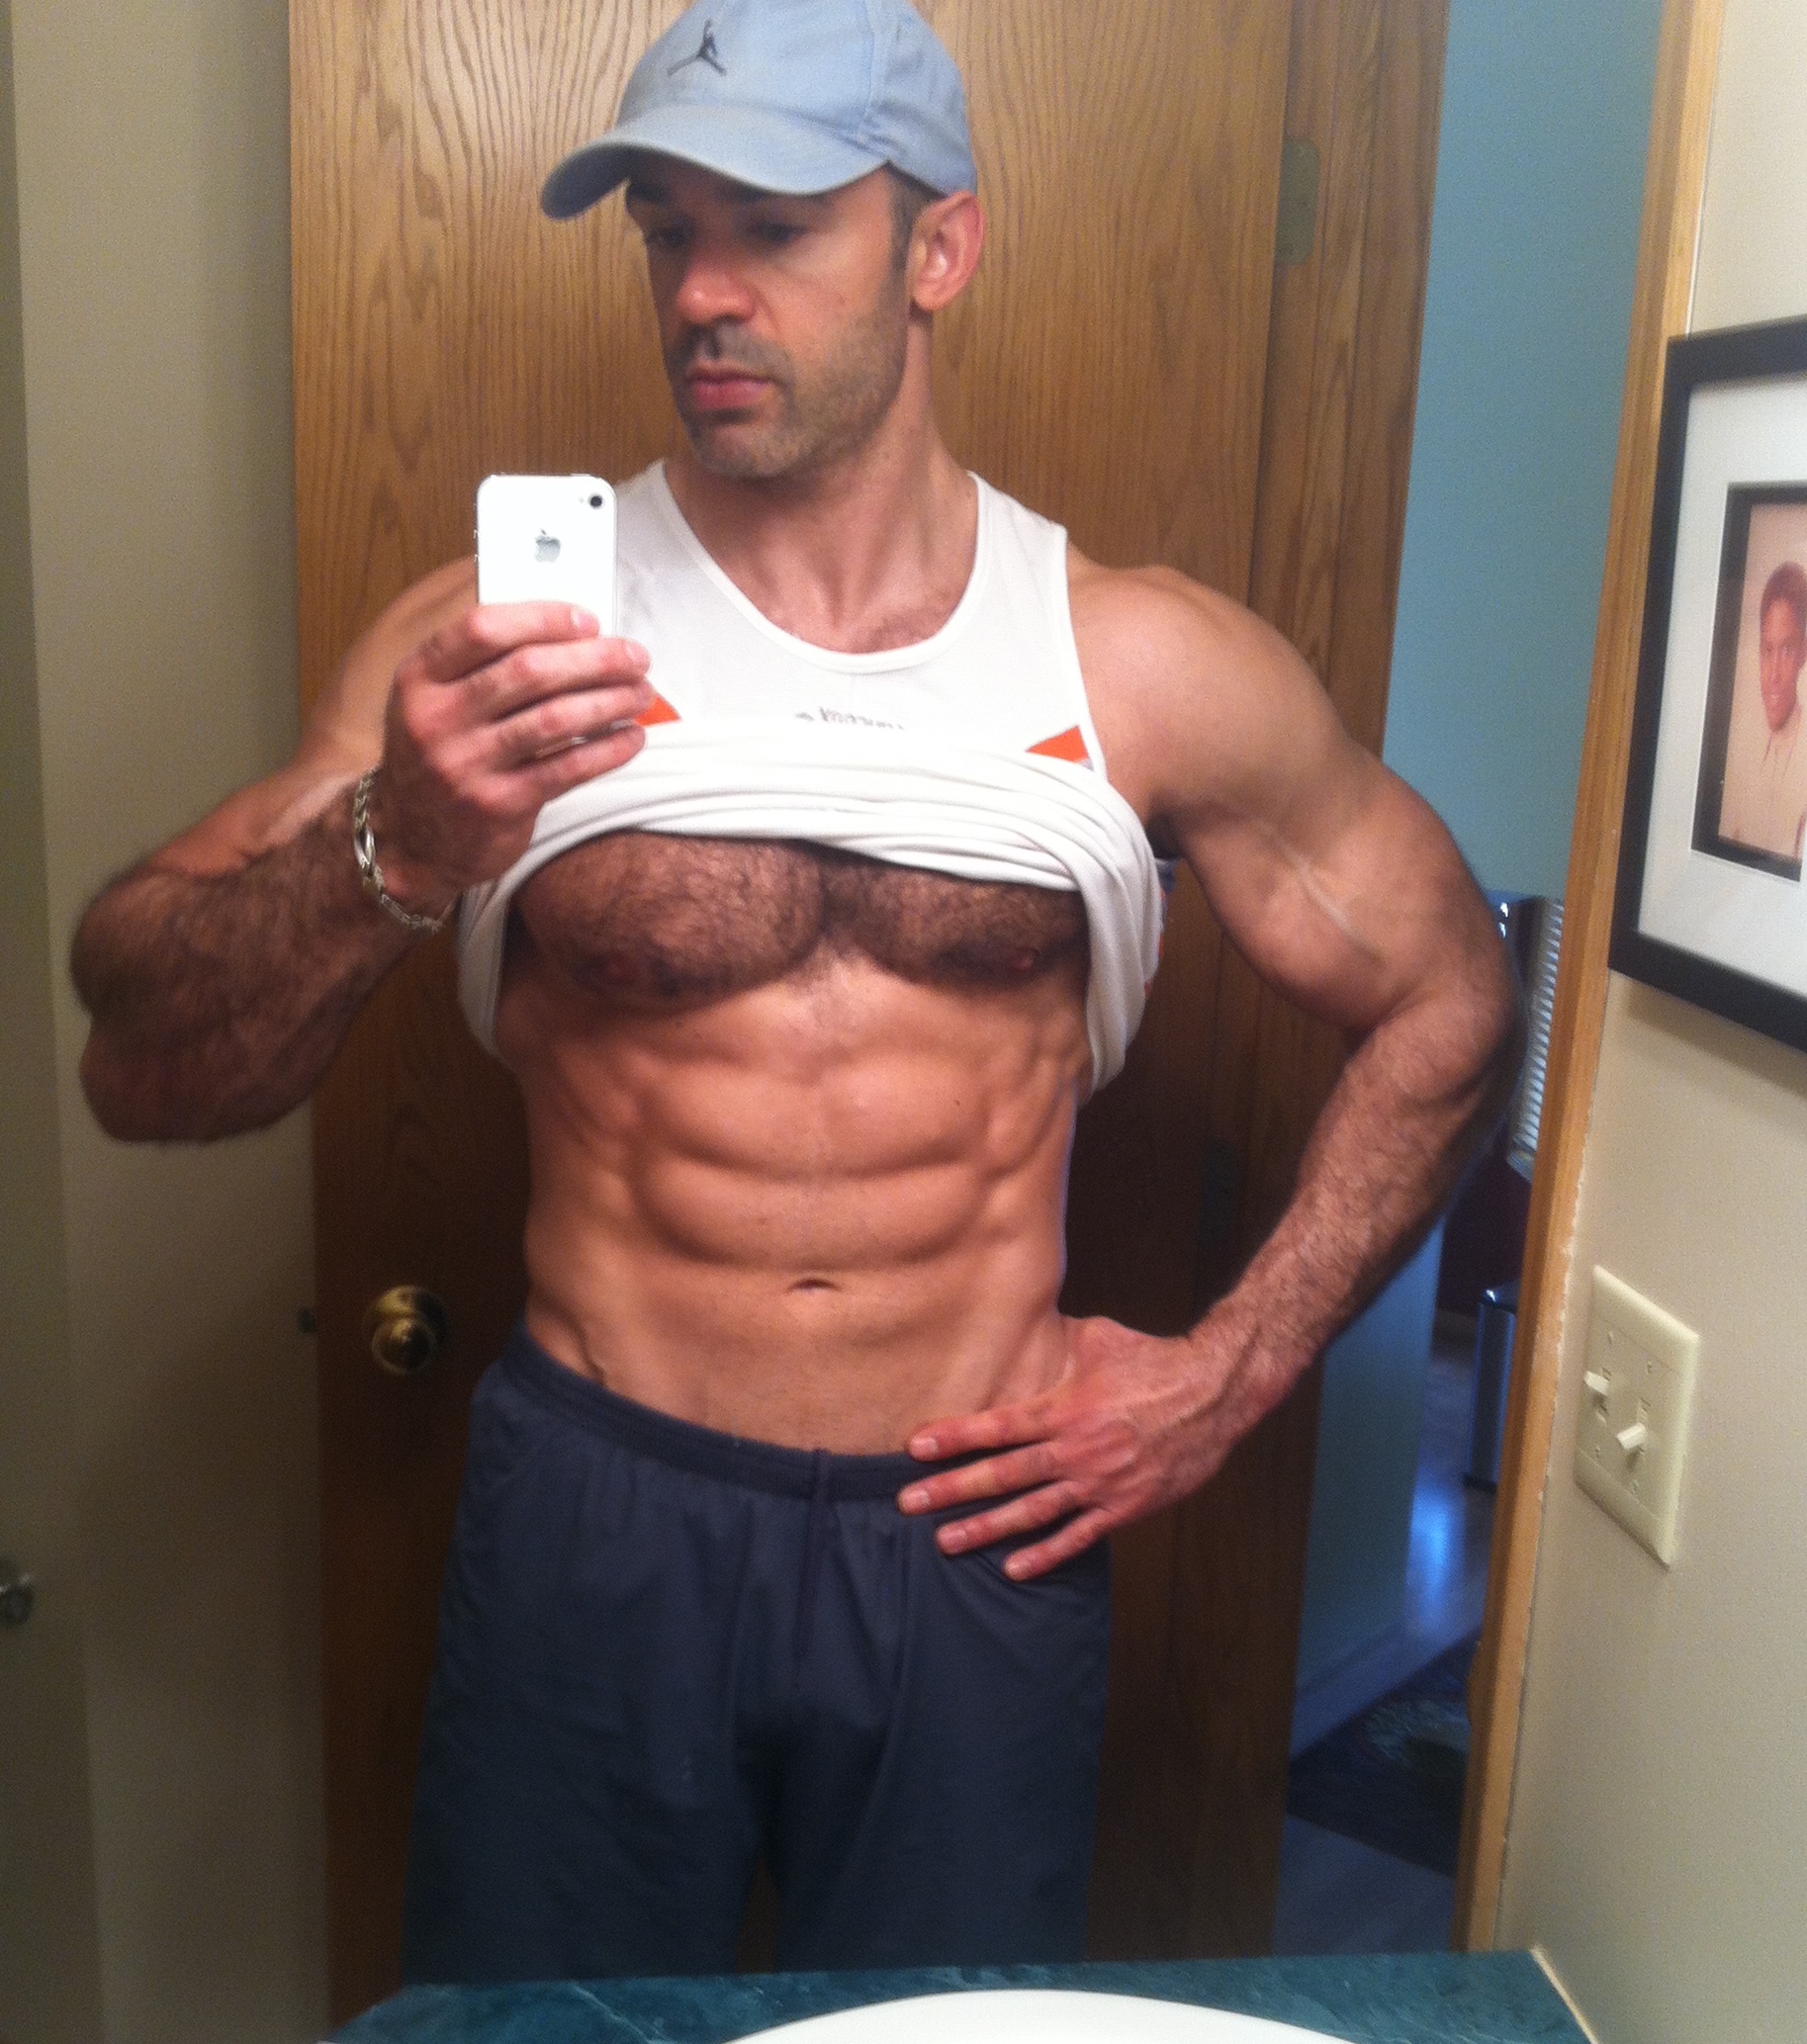 How To Get Lean, STON Nutrition, Ryan Stoner recent pic